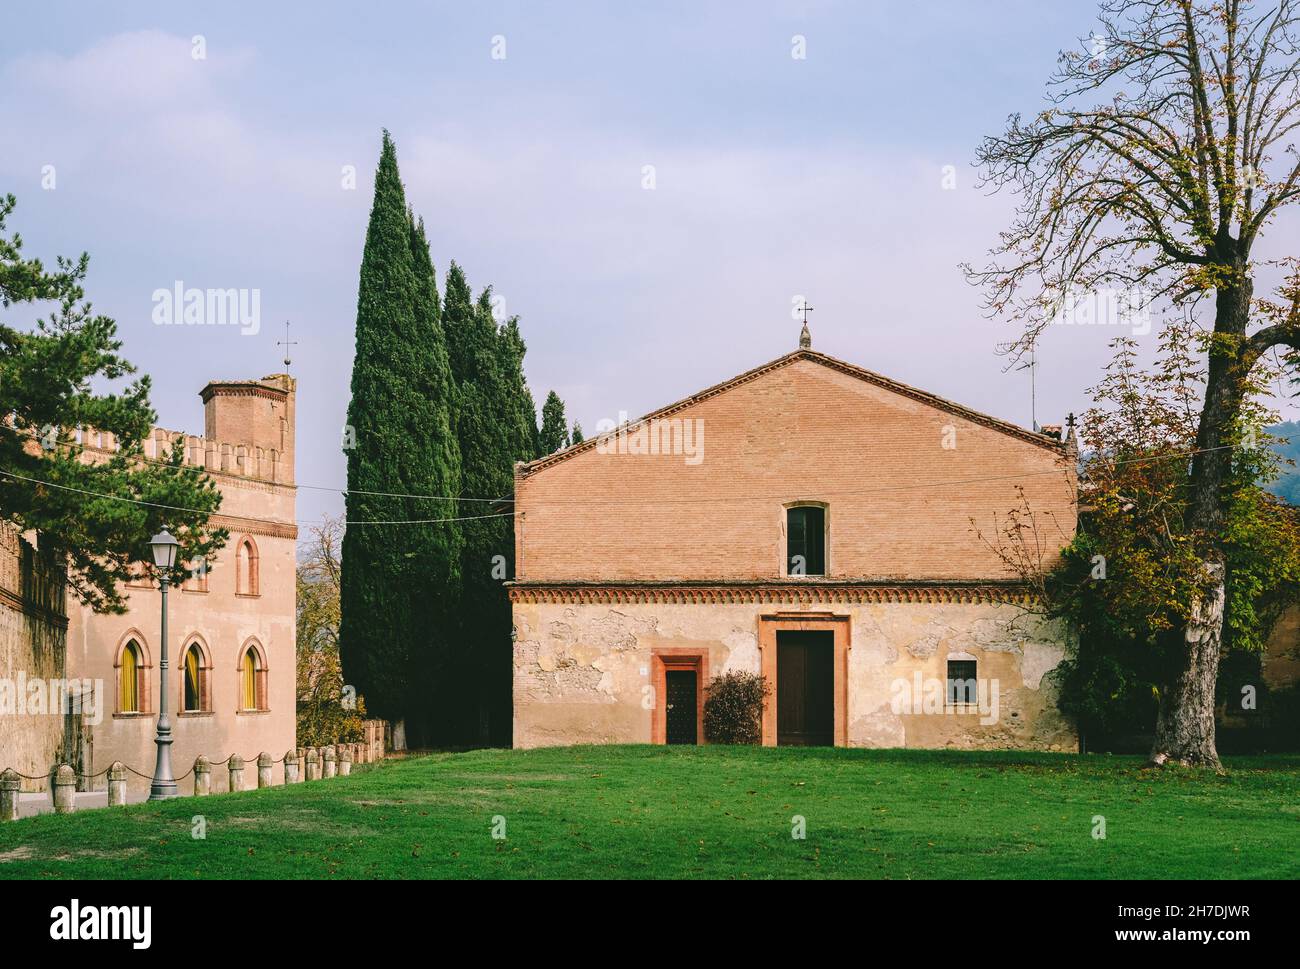 Old country church in the hillside of Bologna near the De Rossi palace, Pontecchio, Emilia-Romagna, Italy Stock Photo